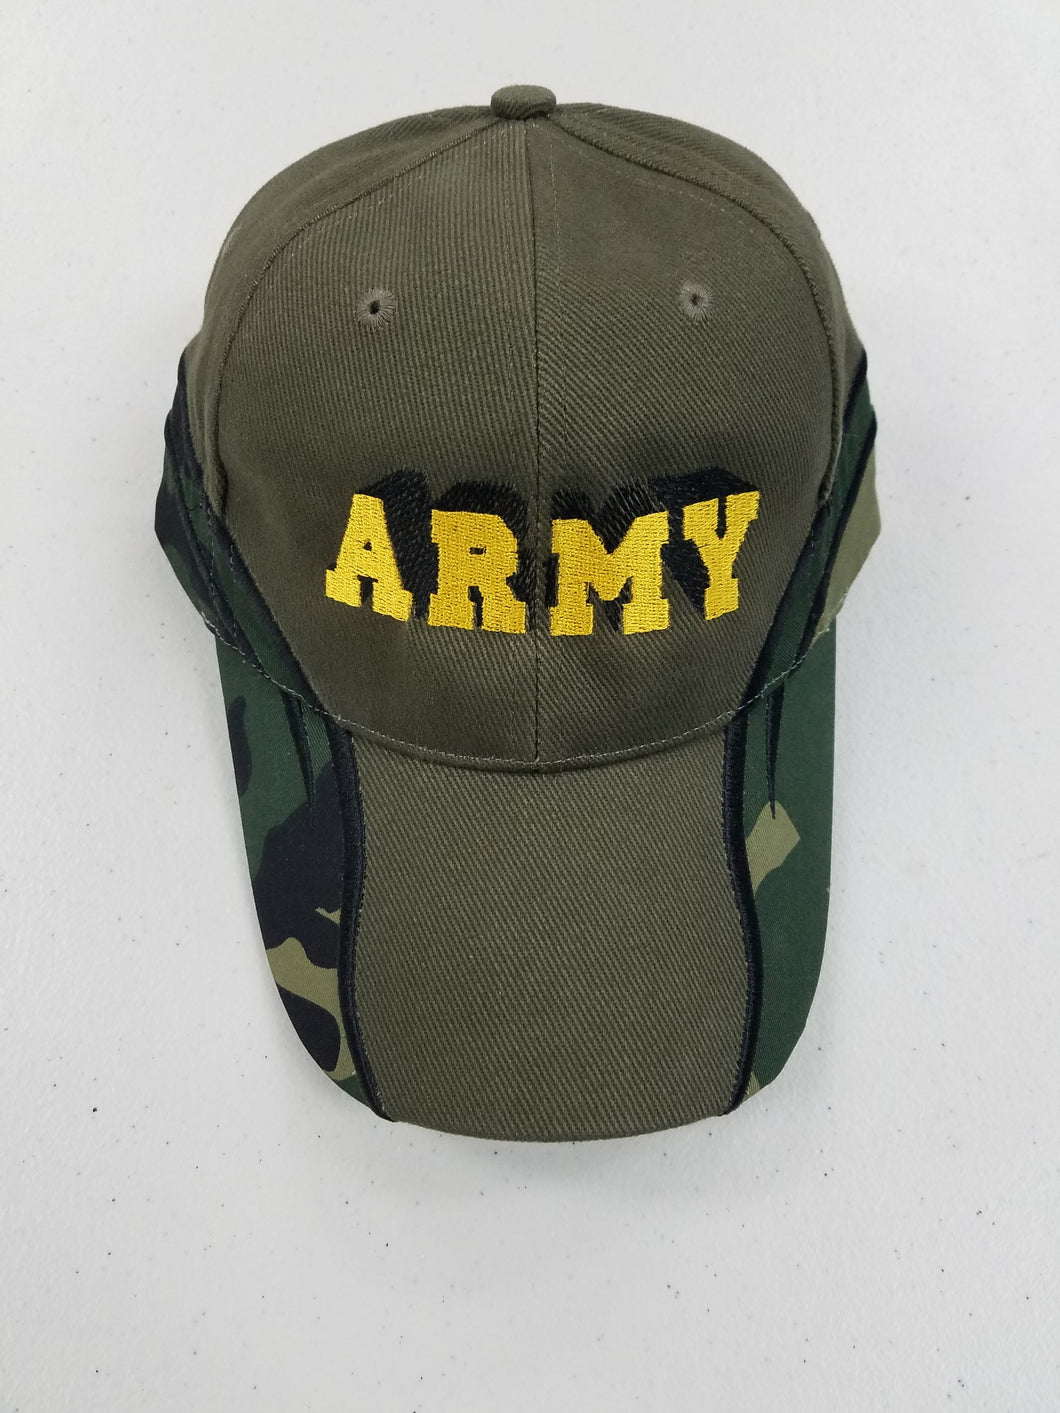 Army hat - olive